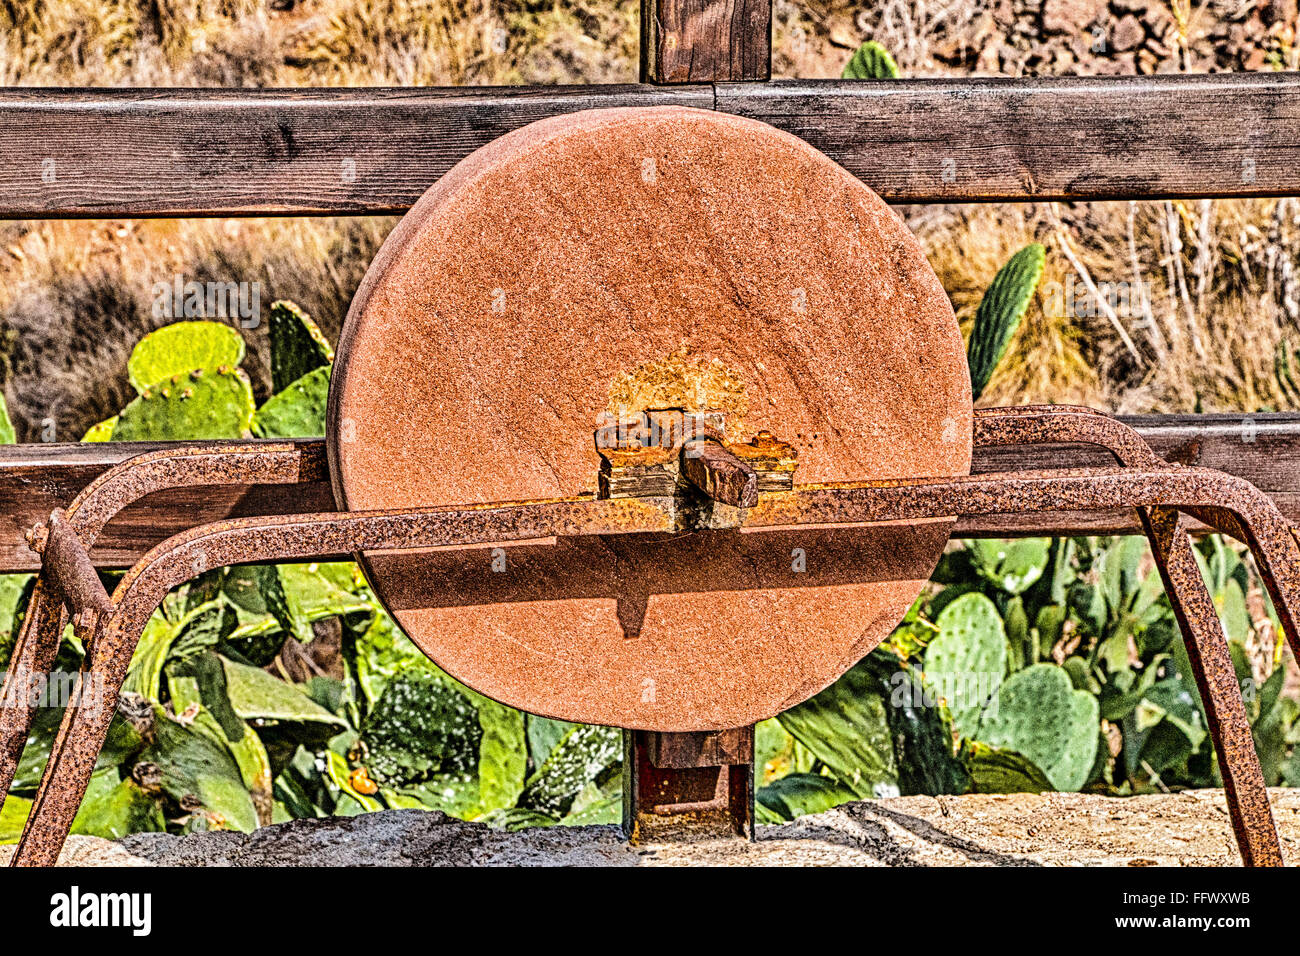 Stone wheel used for sharpening knives and tools,El Hoyo, Gran Canaria, Canary Islands, Spain, Europe Stock Photo